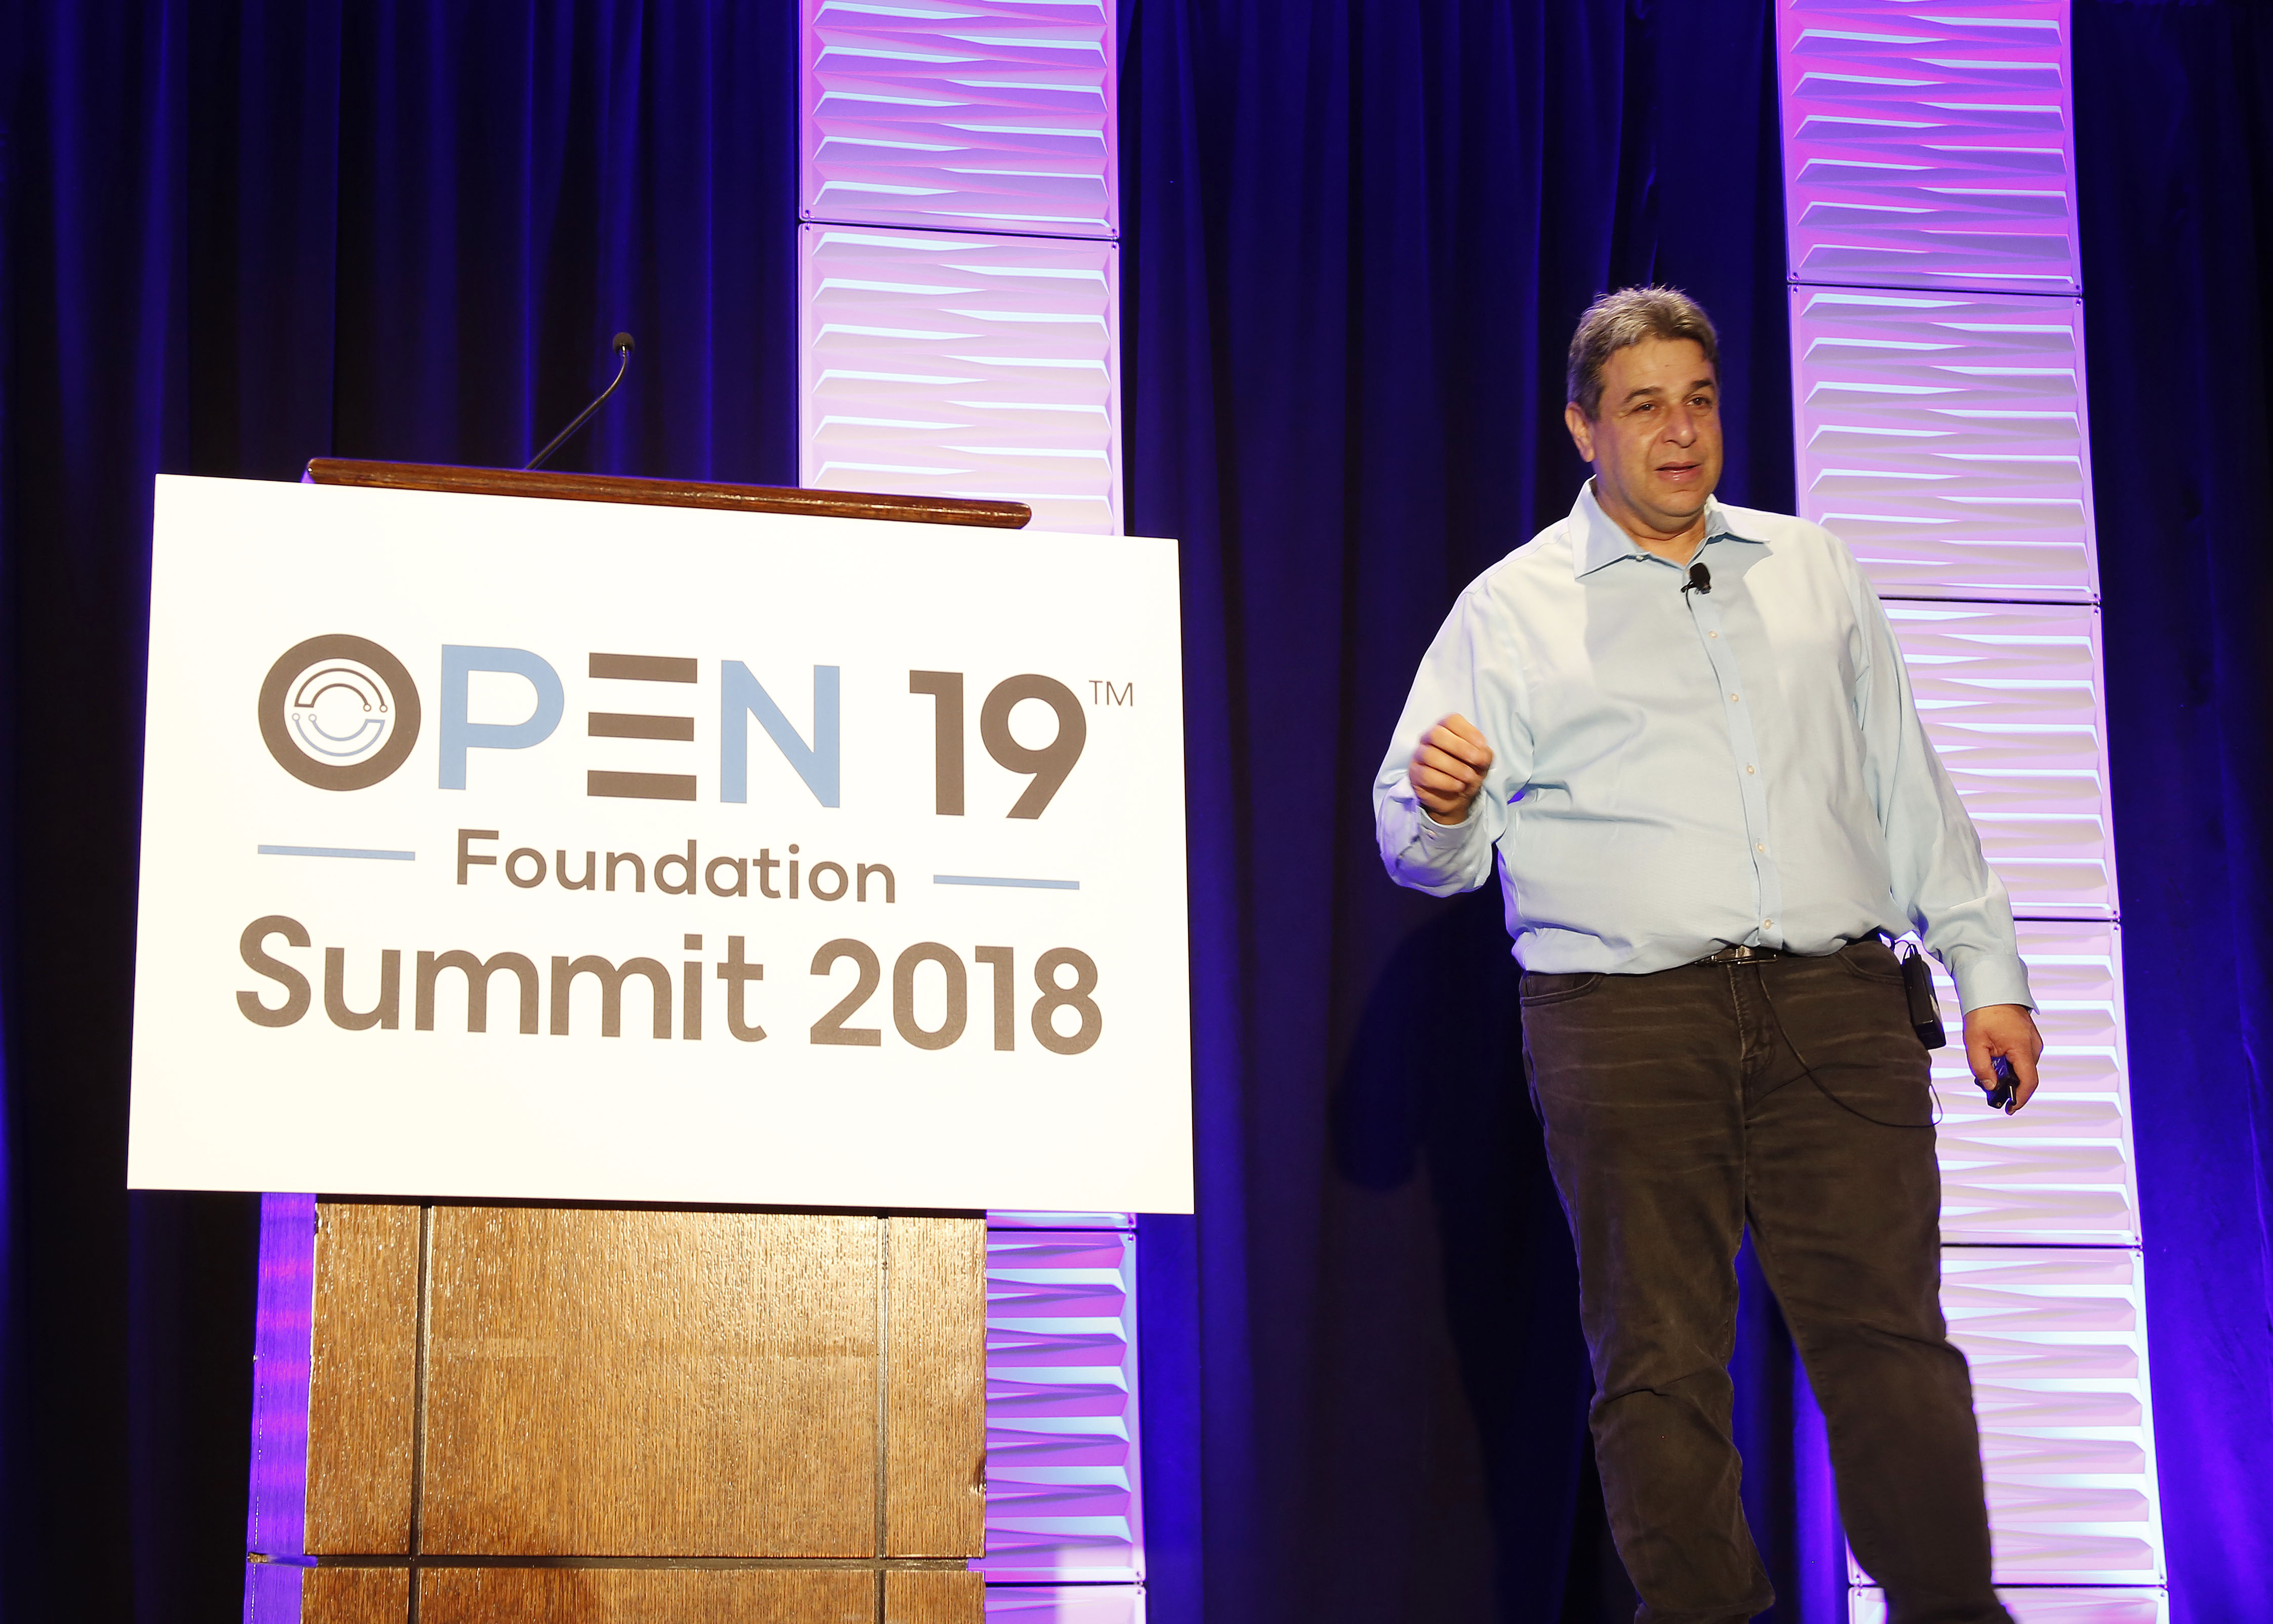 Yuval Bachar, principal engineer, data center architecture, LinkedIn, and president and chairman of the Open19 Foundation, speaking at the foundation's 2018 summit.